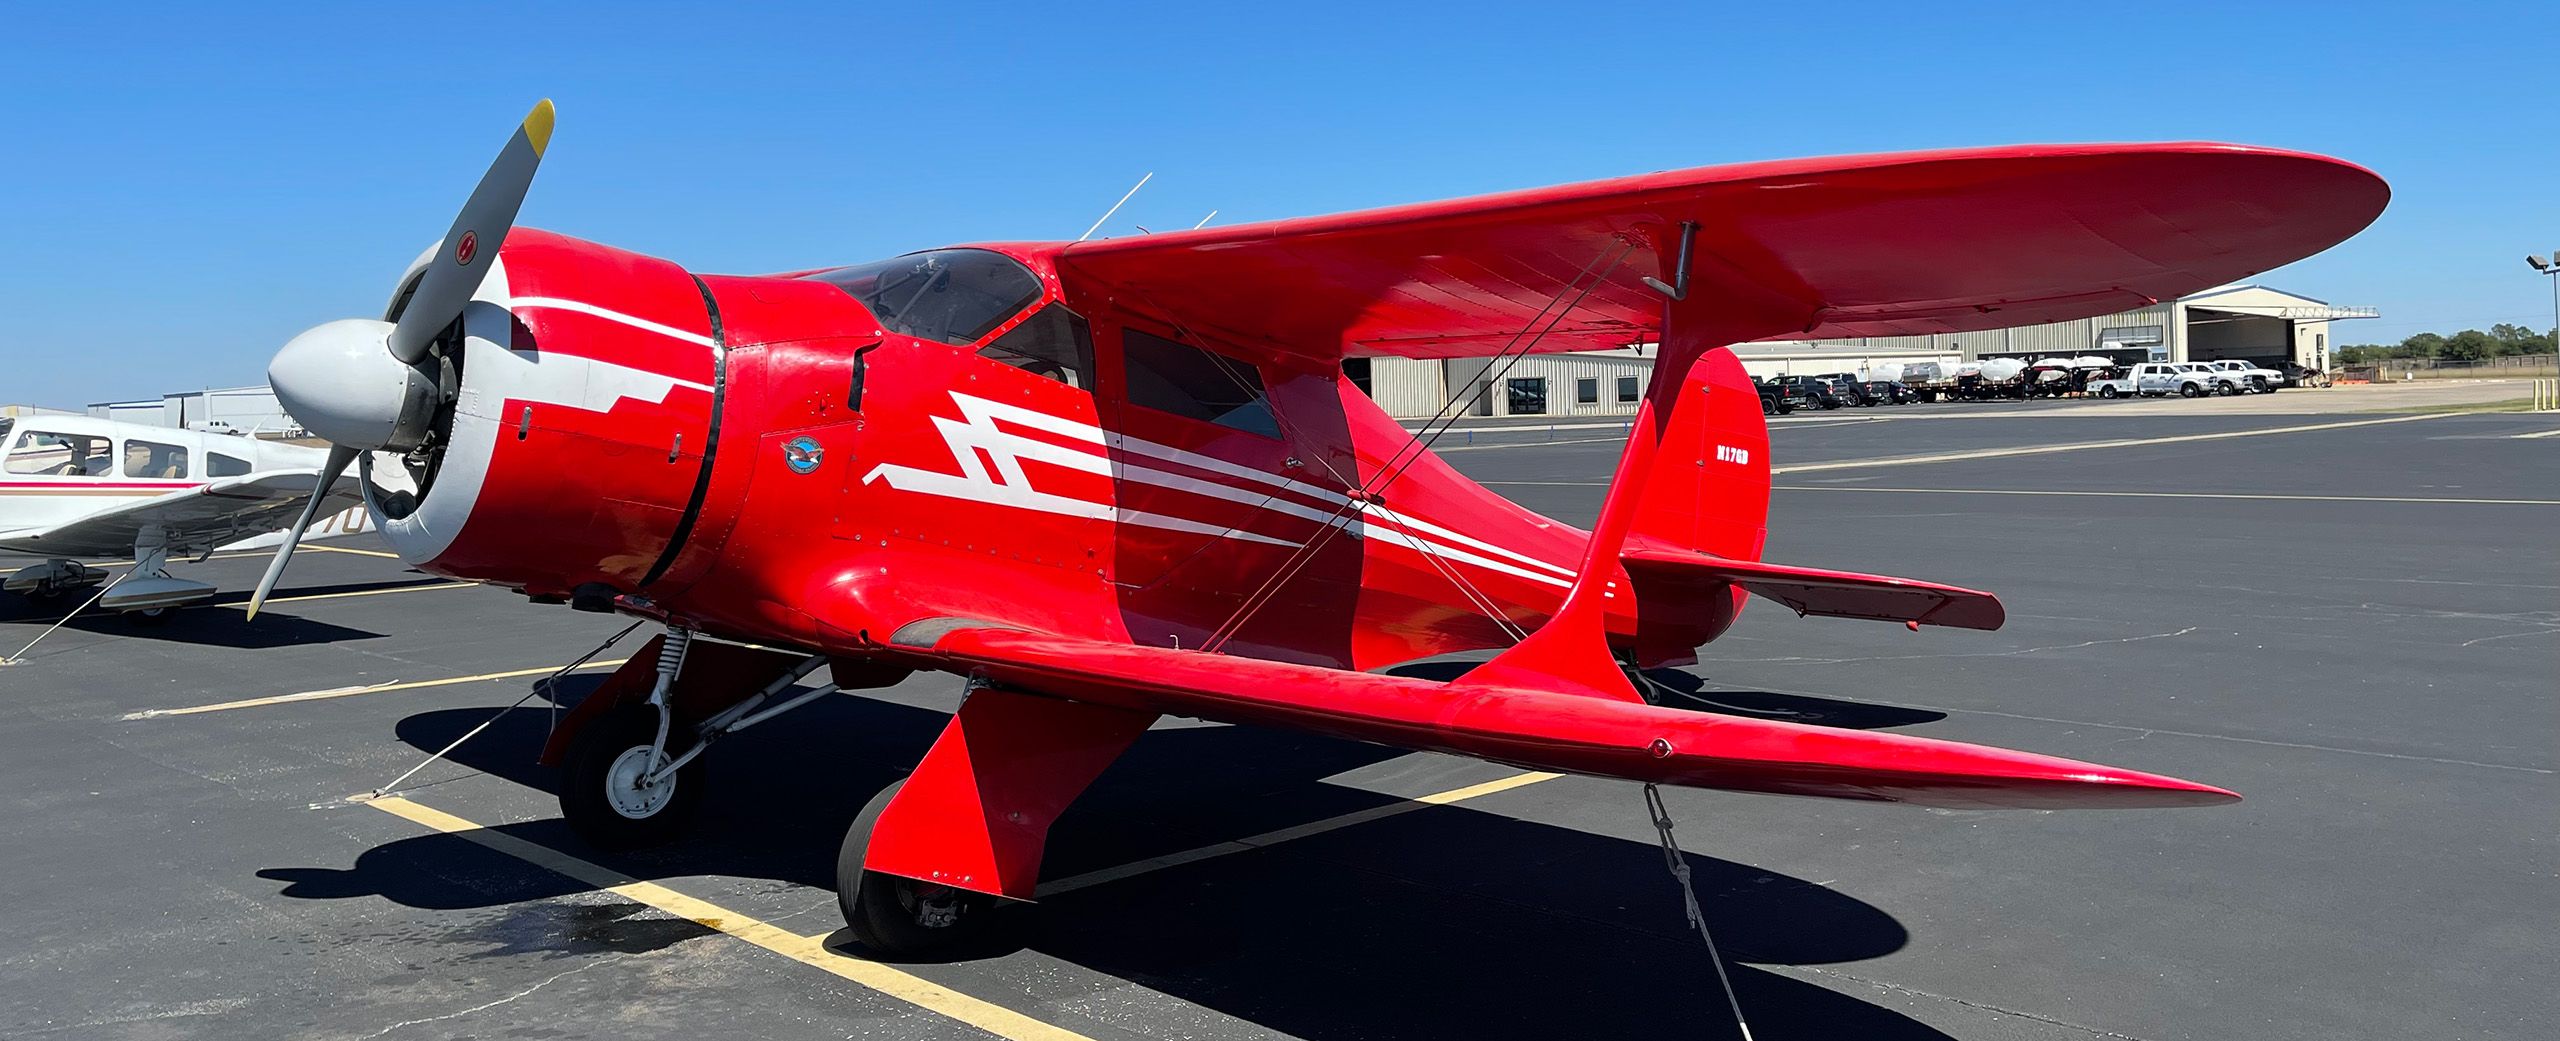 3-quarter-view of a red and white 1944 beech staggerwing sitting on the tarmac. vivid blue sky.